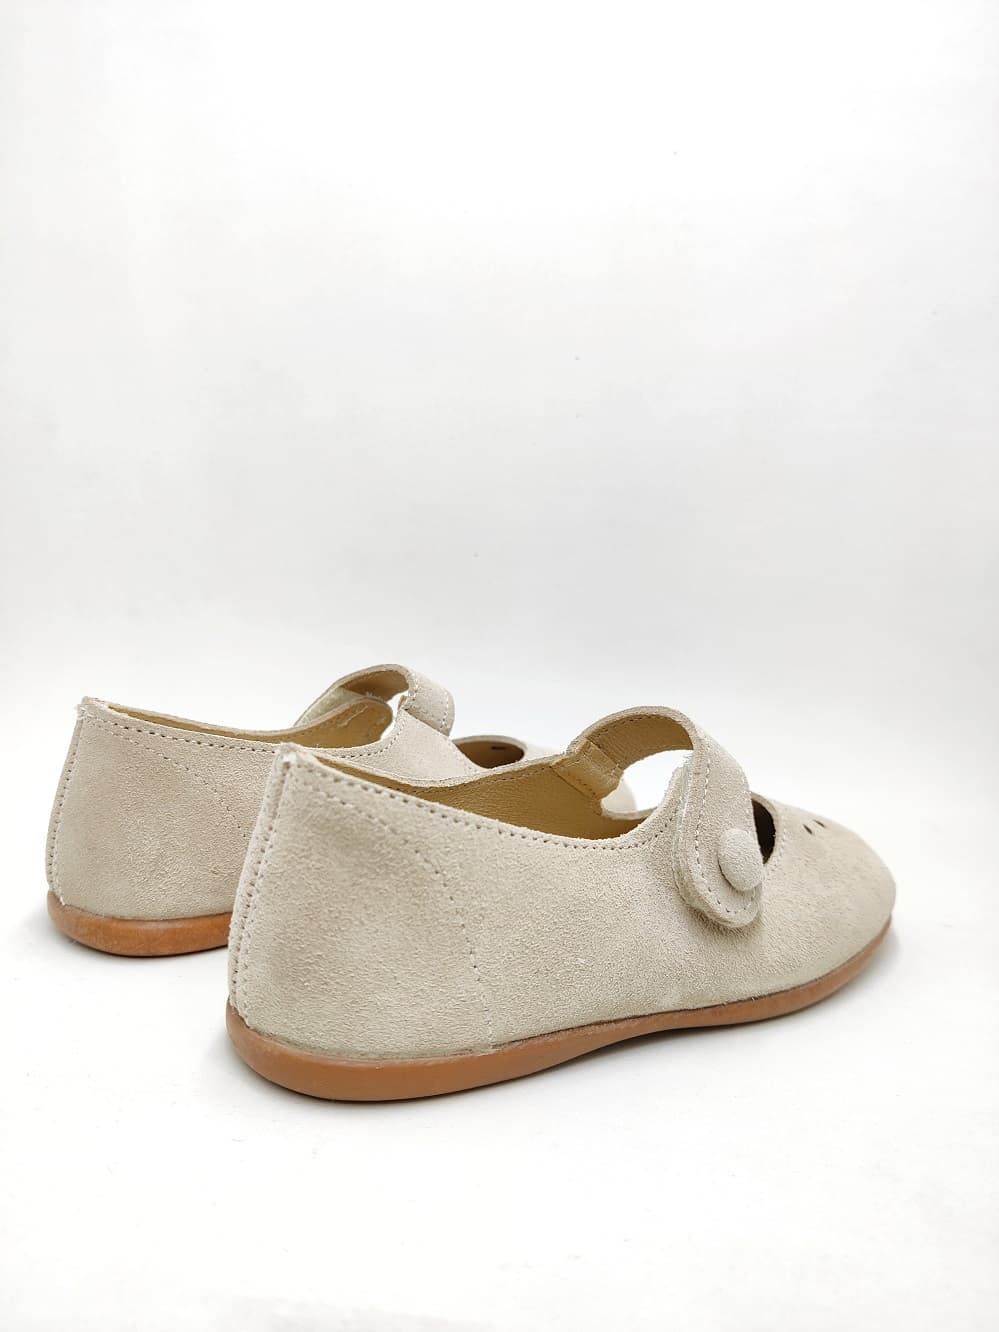 Merceditas sweets for girls in raw suede - Image 3